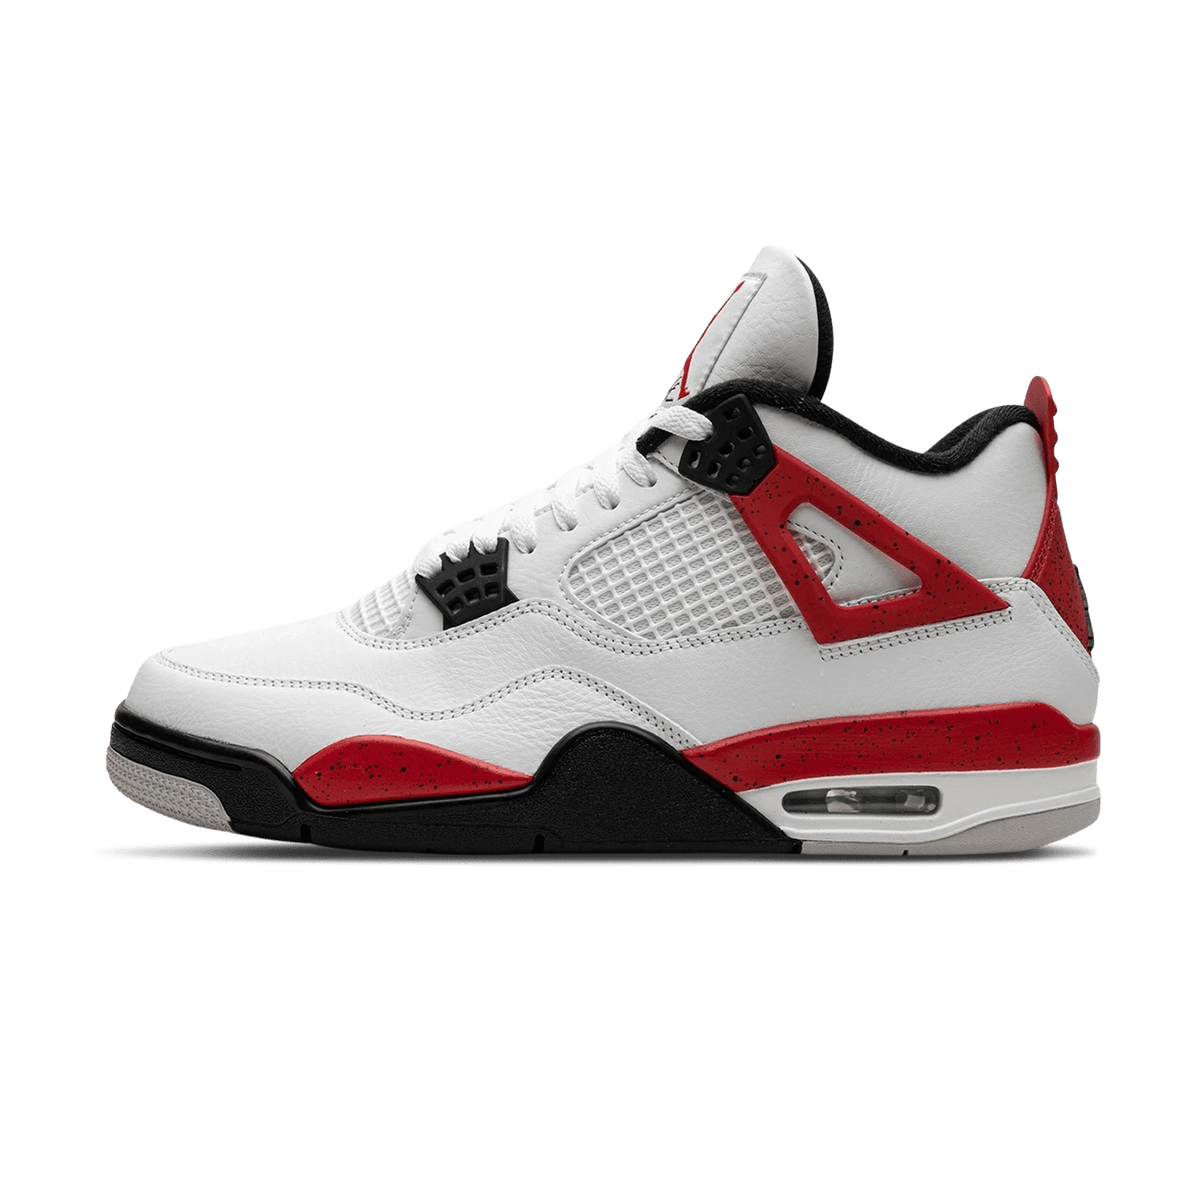 CT2300-001 Nike Euphoria Star Sydney Sweeney Sports the Jacquemus x Nike Collection Low Double Swoosh Black White 2020 For Sale Retro GS 'Red Cement' - UrlfreezeShops